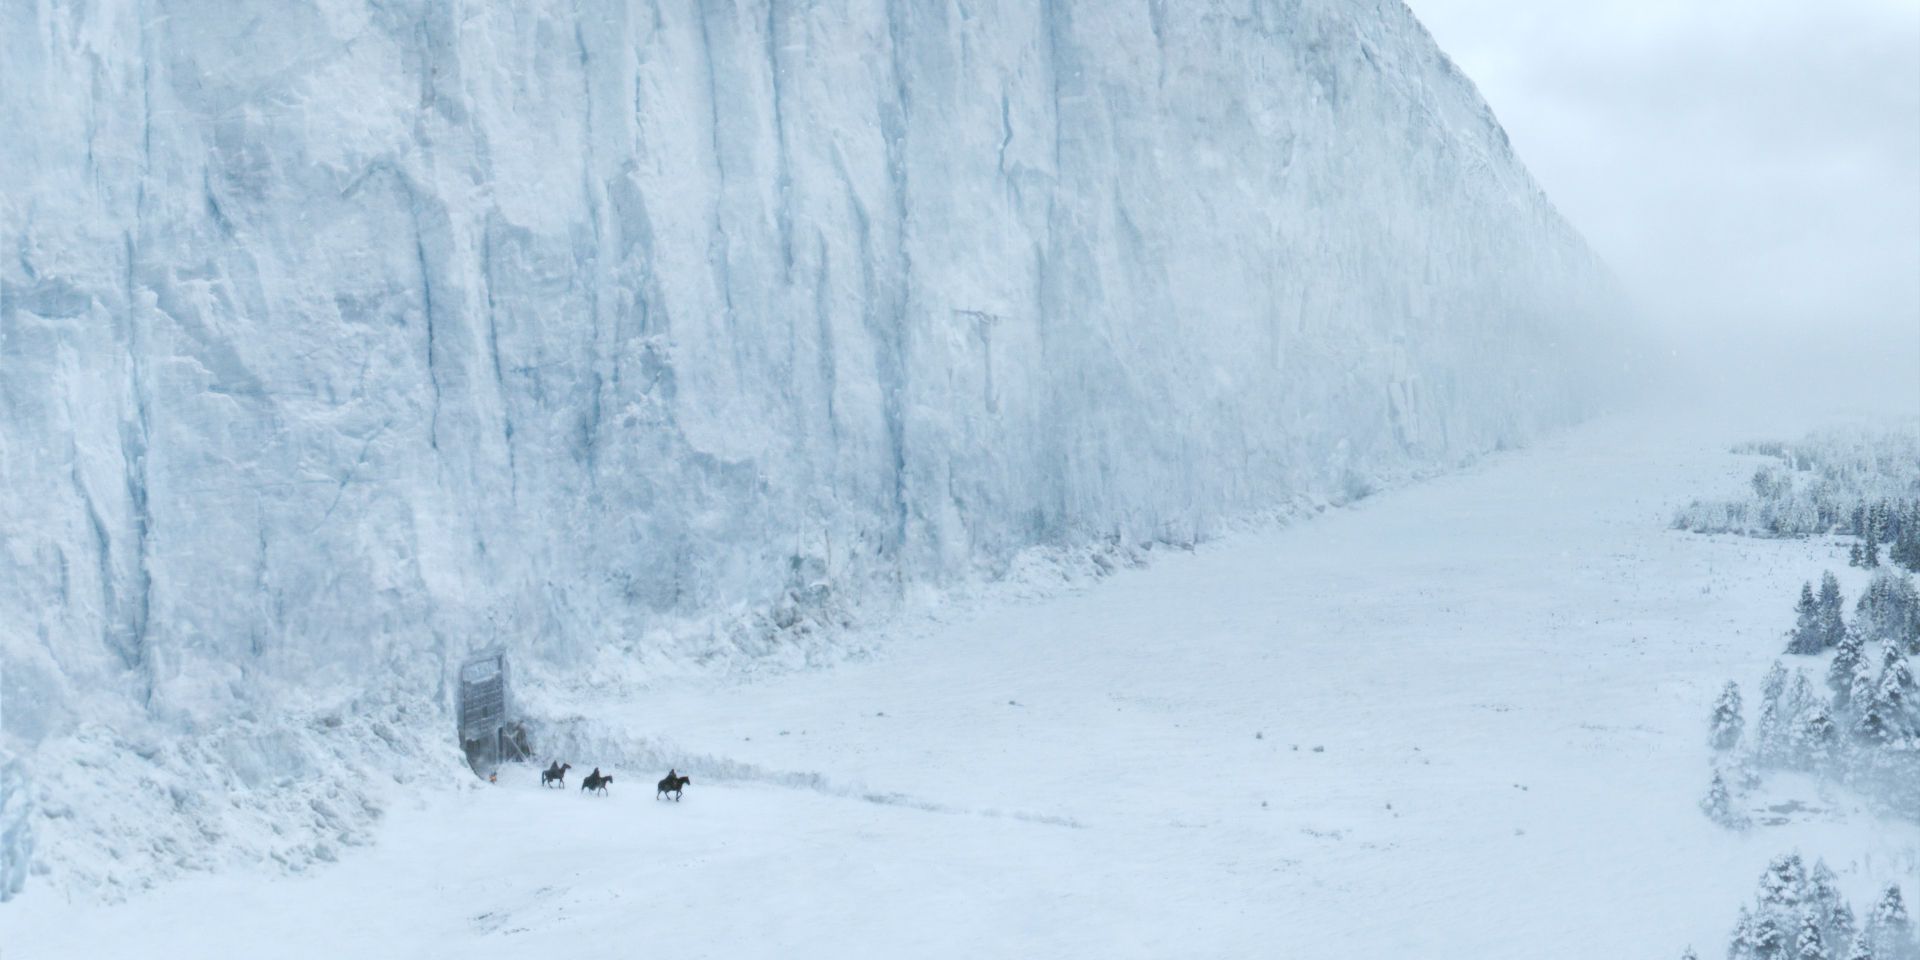 The Wall in Game of Thrones